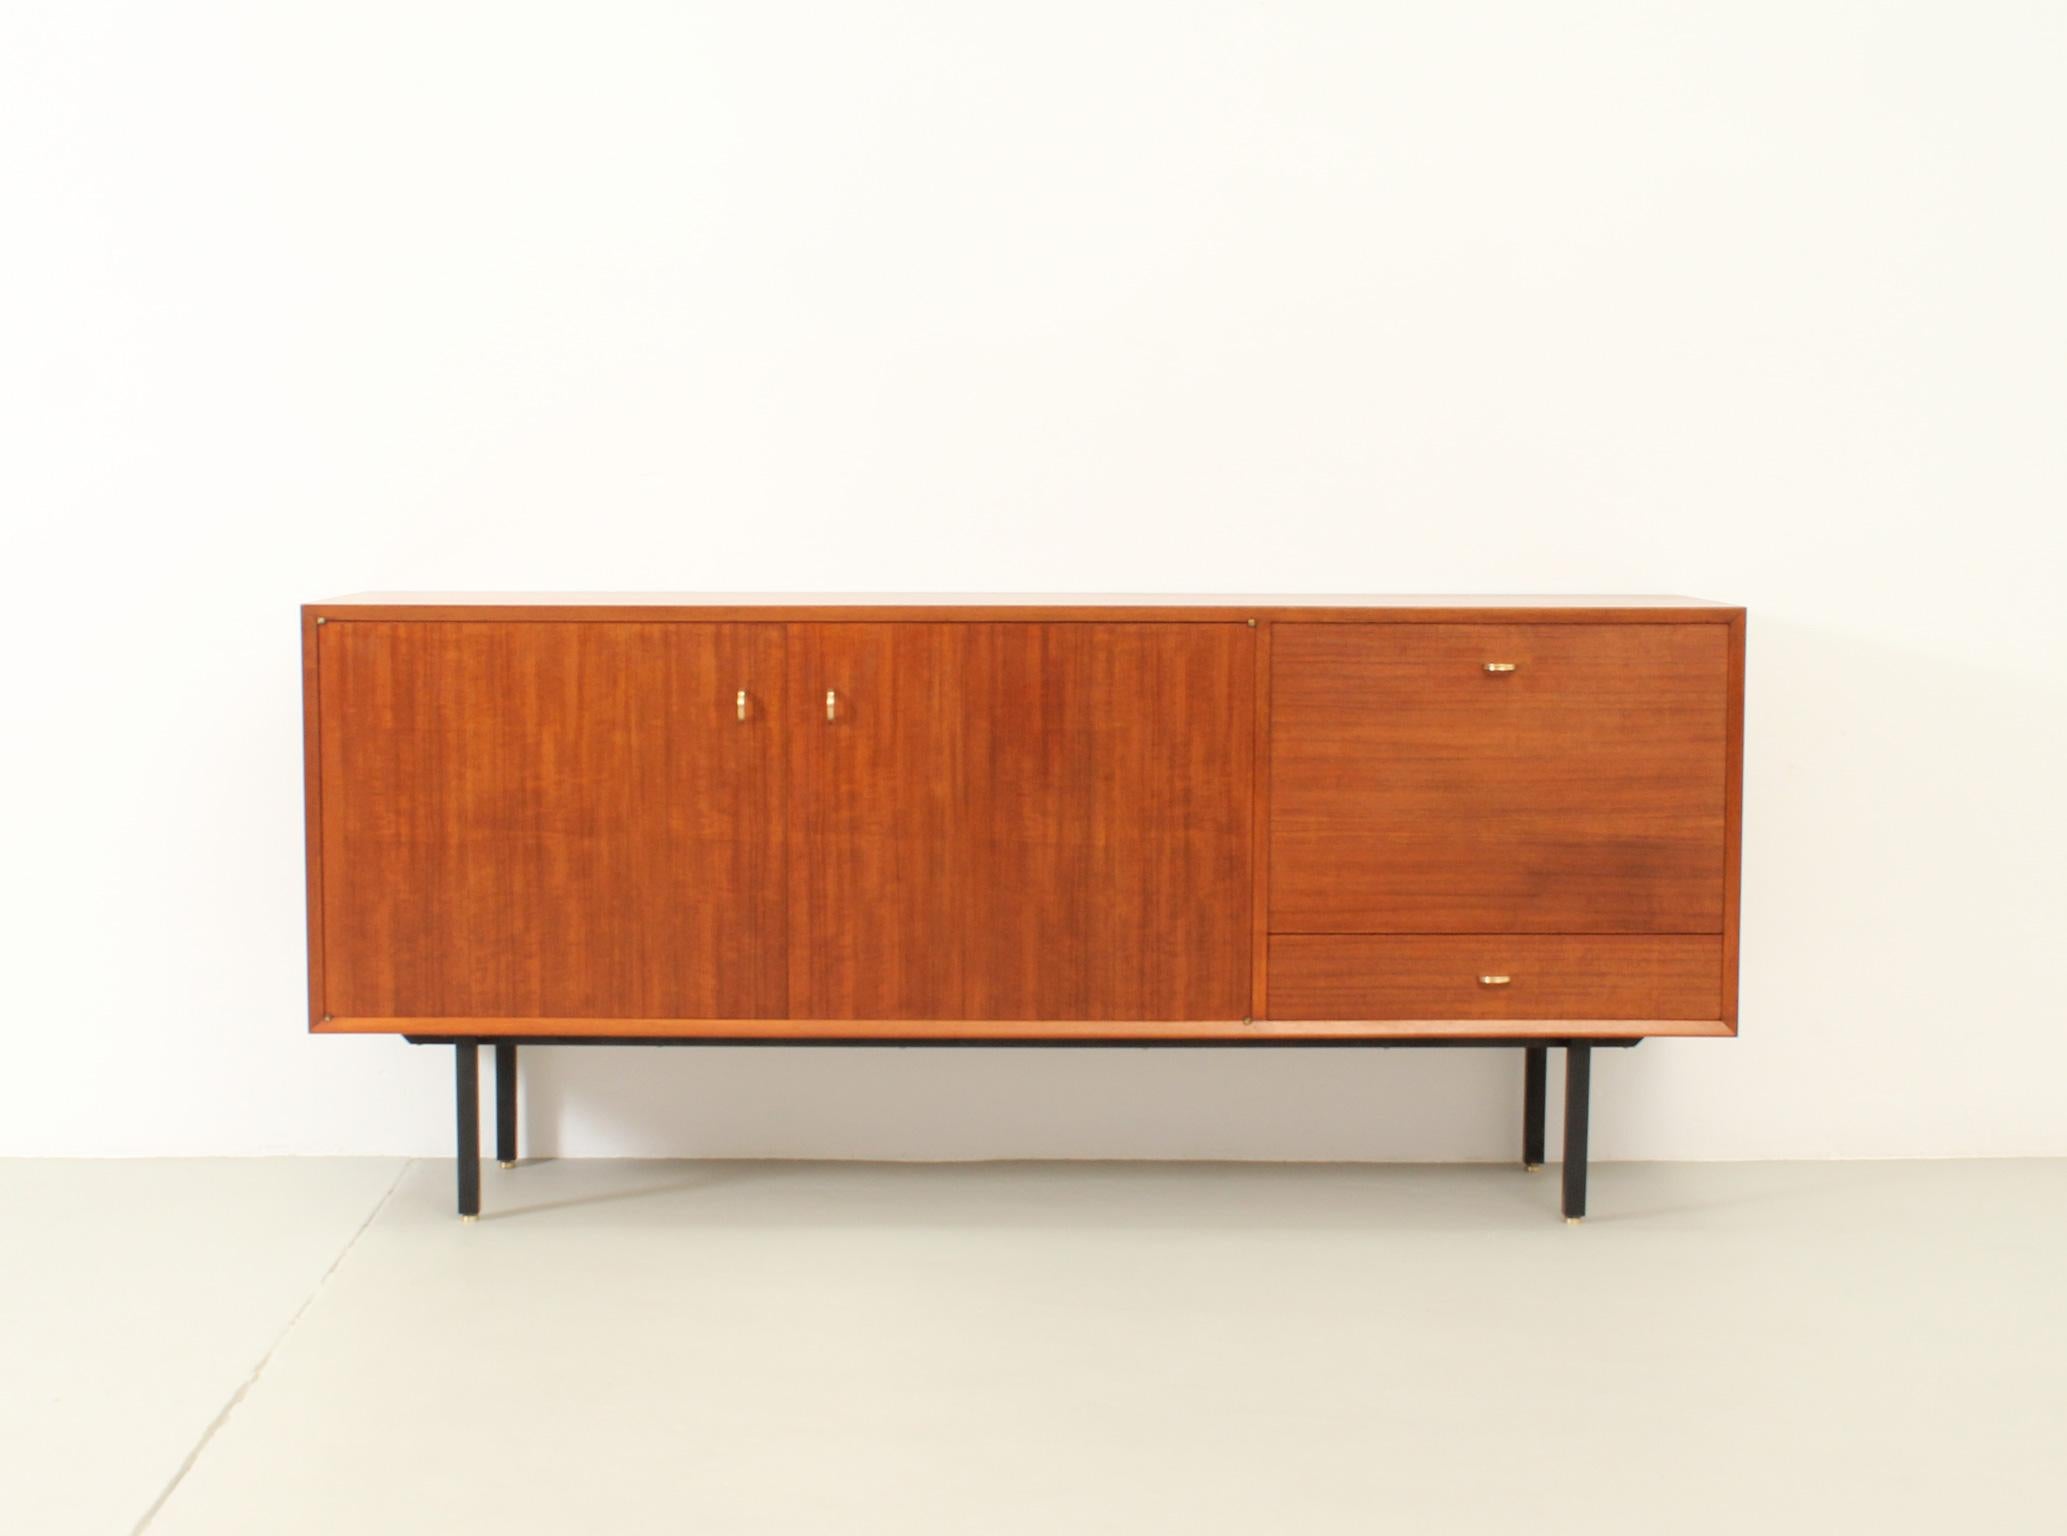 Teak sideboard from 1950's, France. Teak wood and maple interior with black metal base and brass fittings.